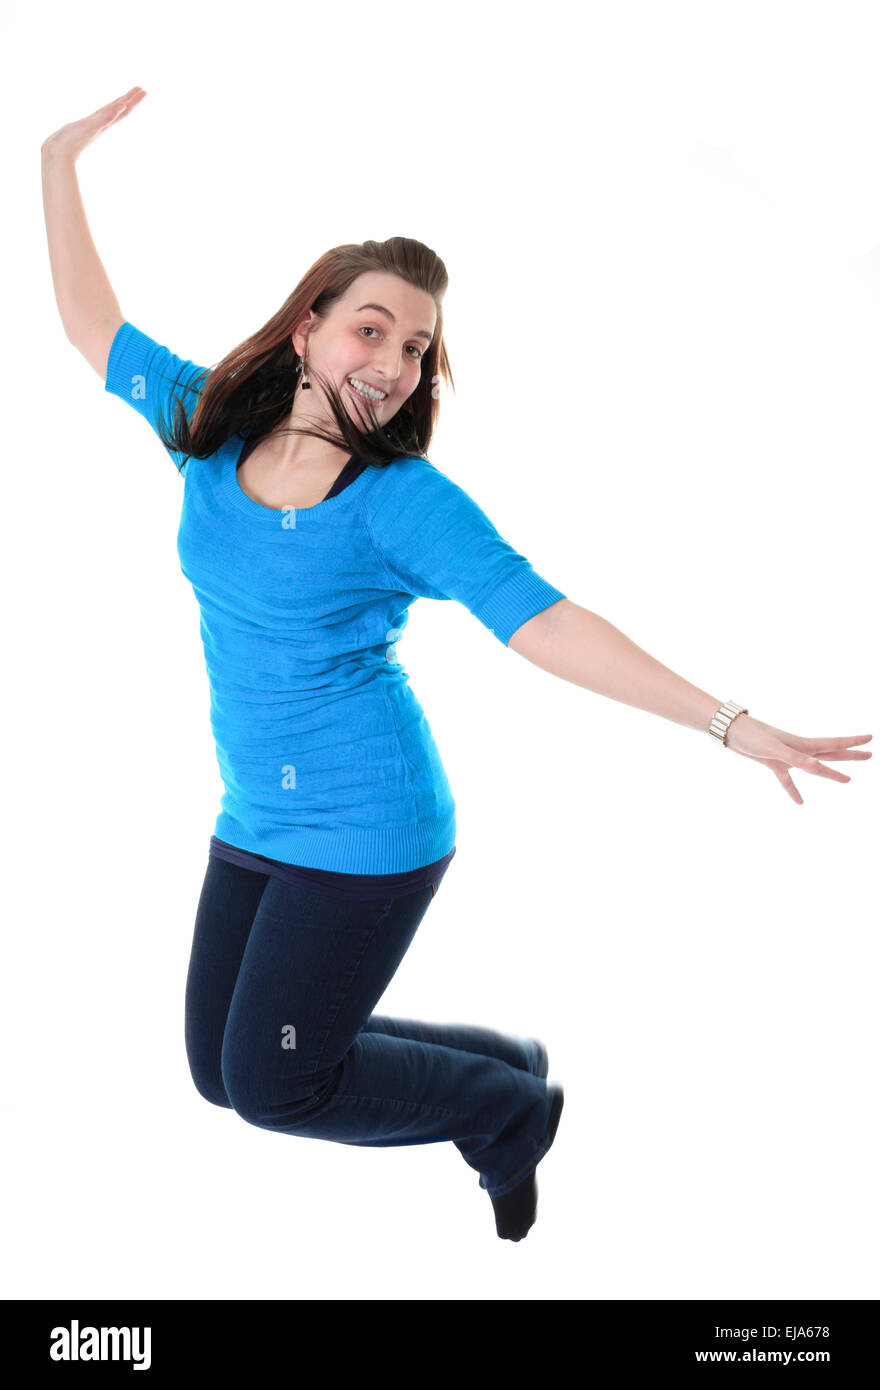 Full length studio photo of attractive woman jumping in air with Stock Photo